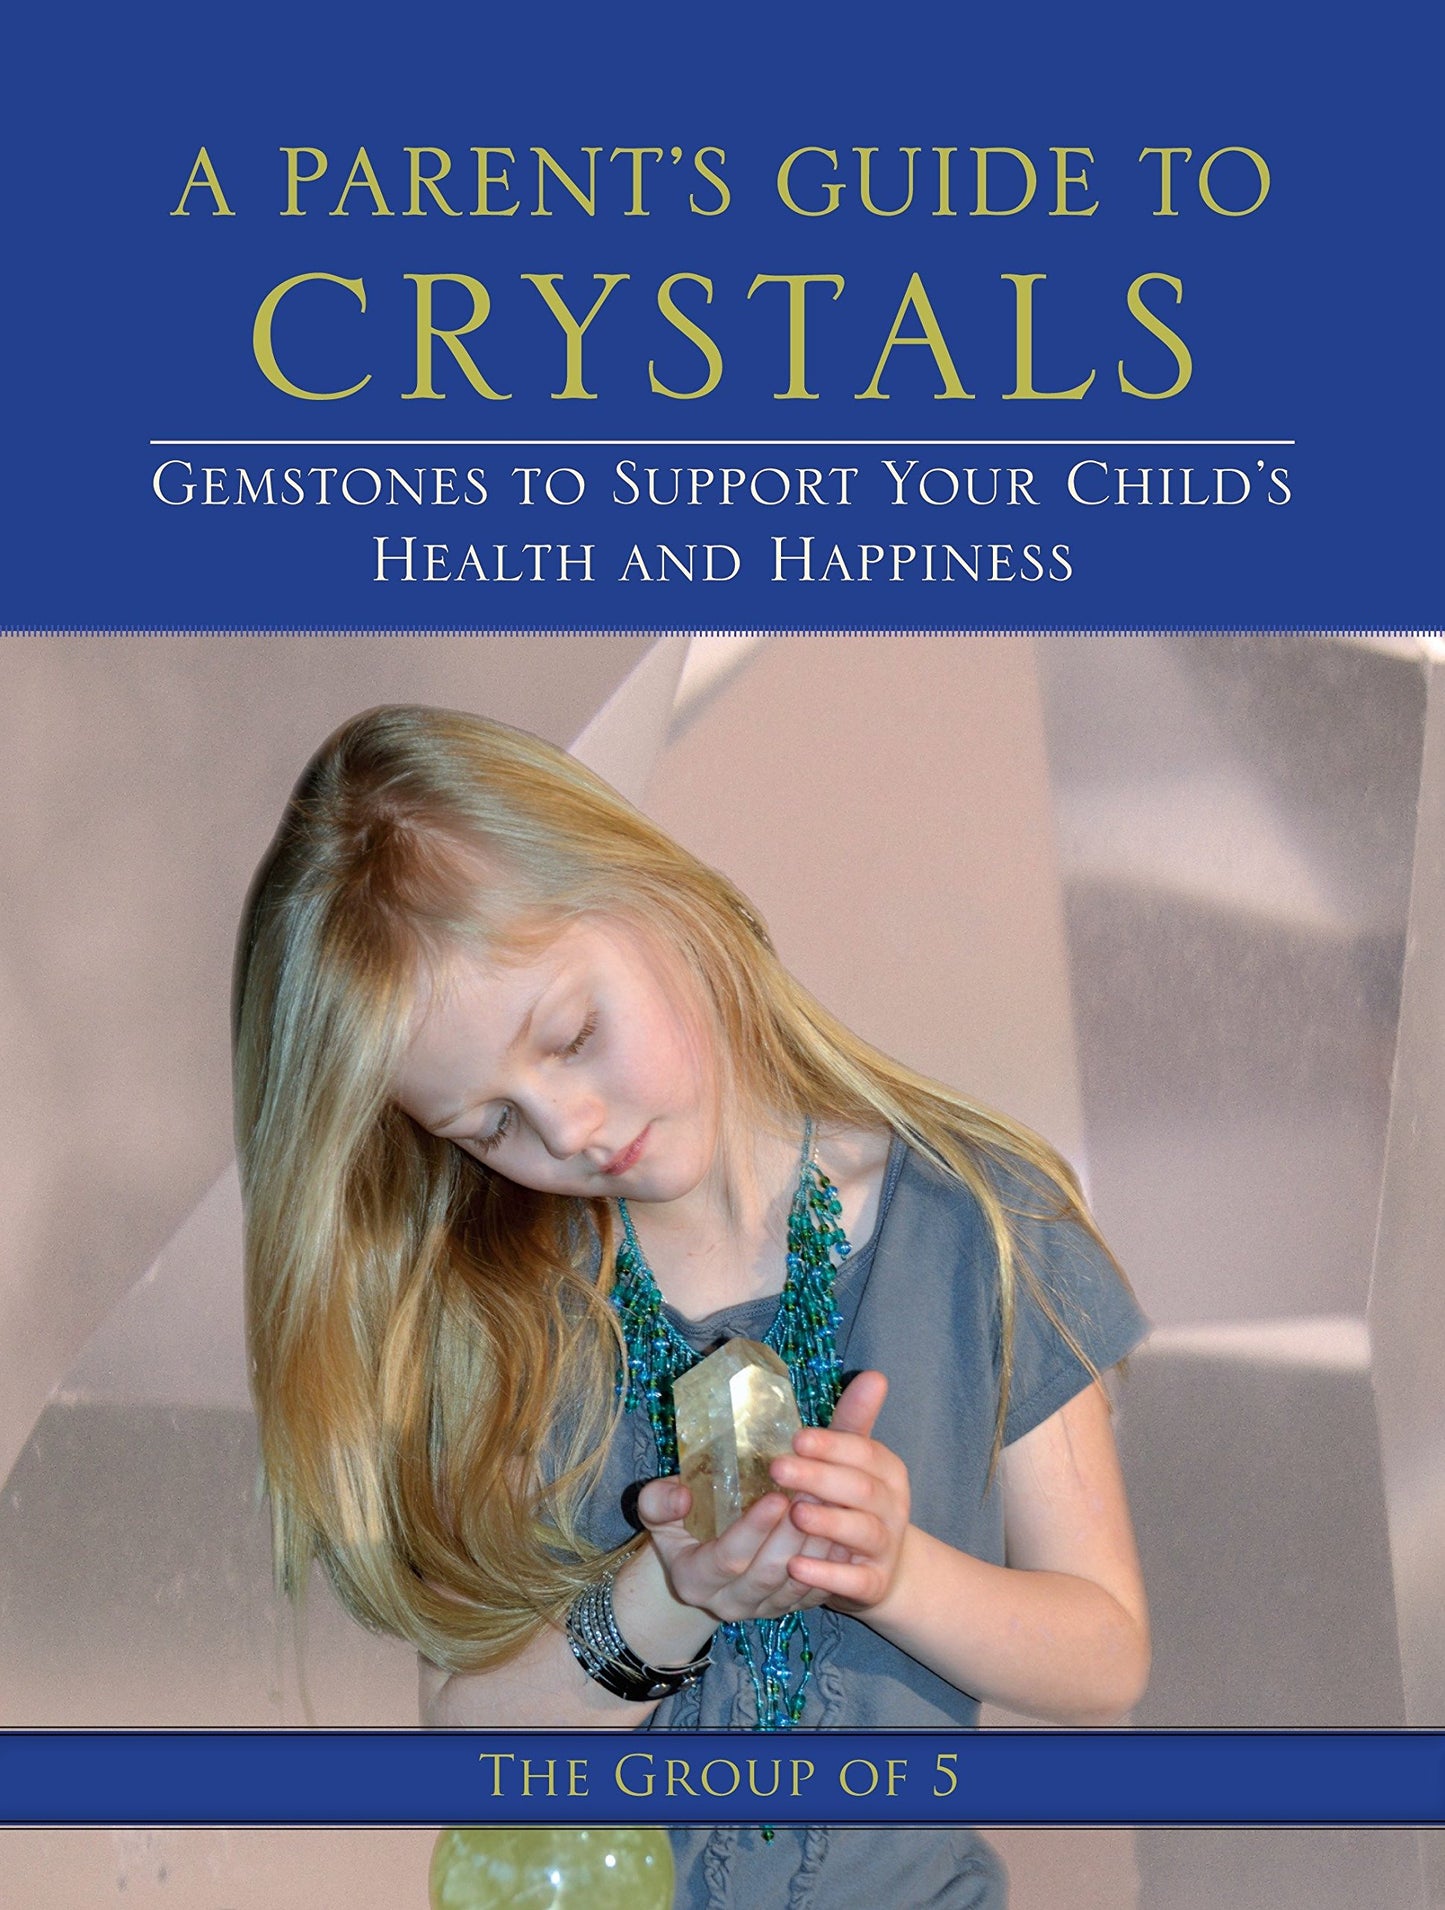 PARENT'S GUIDE TO CRYSTALS, A - GROUP OF 5 - PAPERBACK